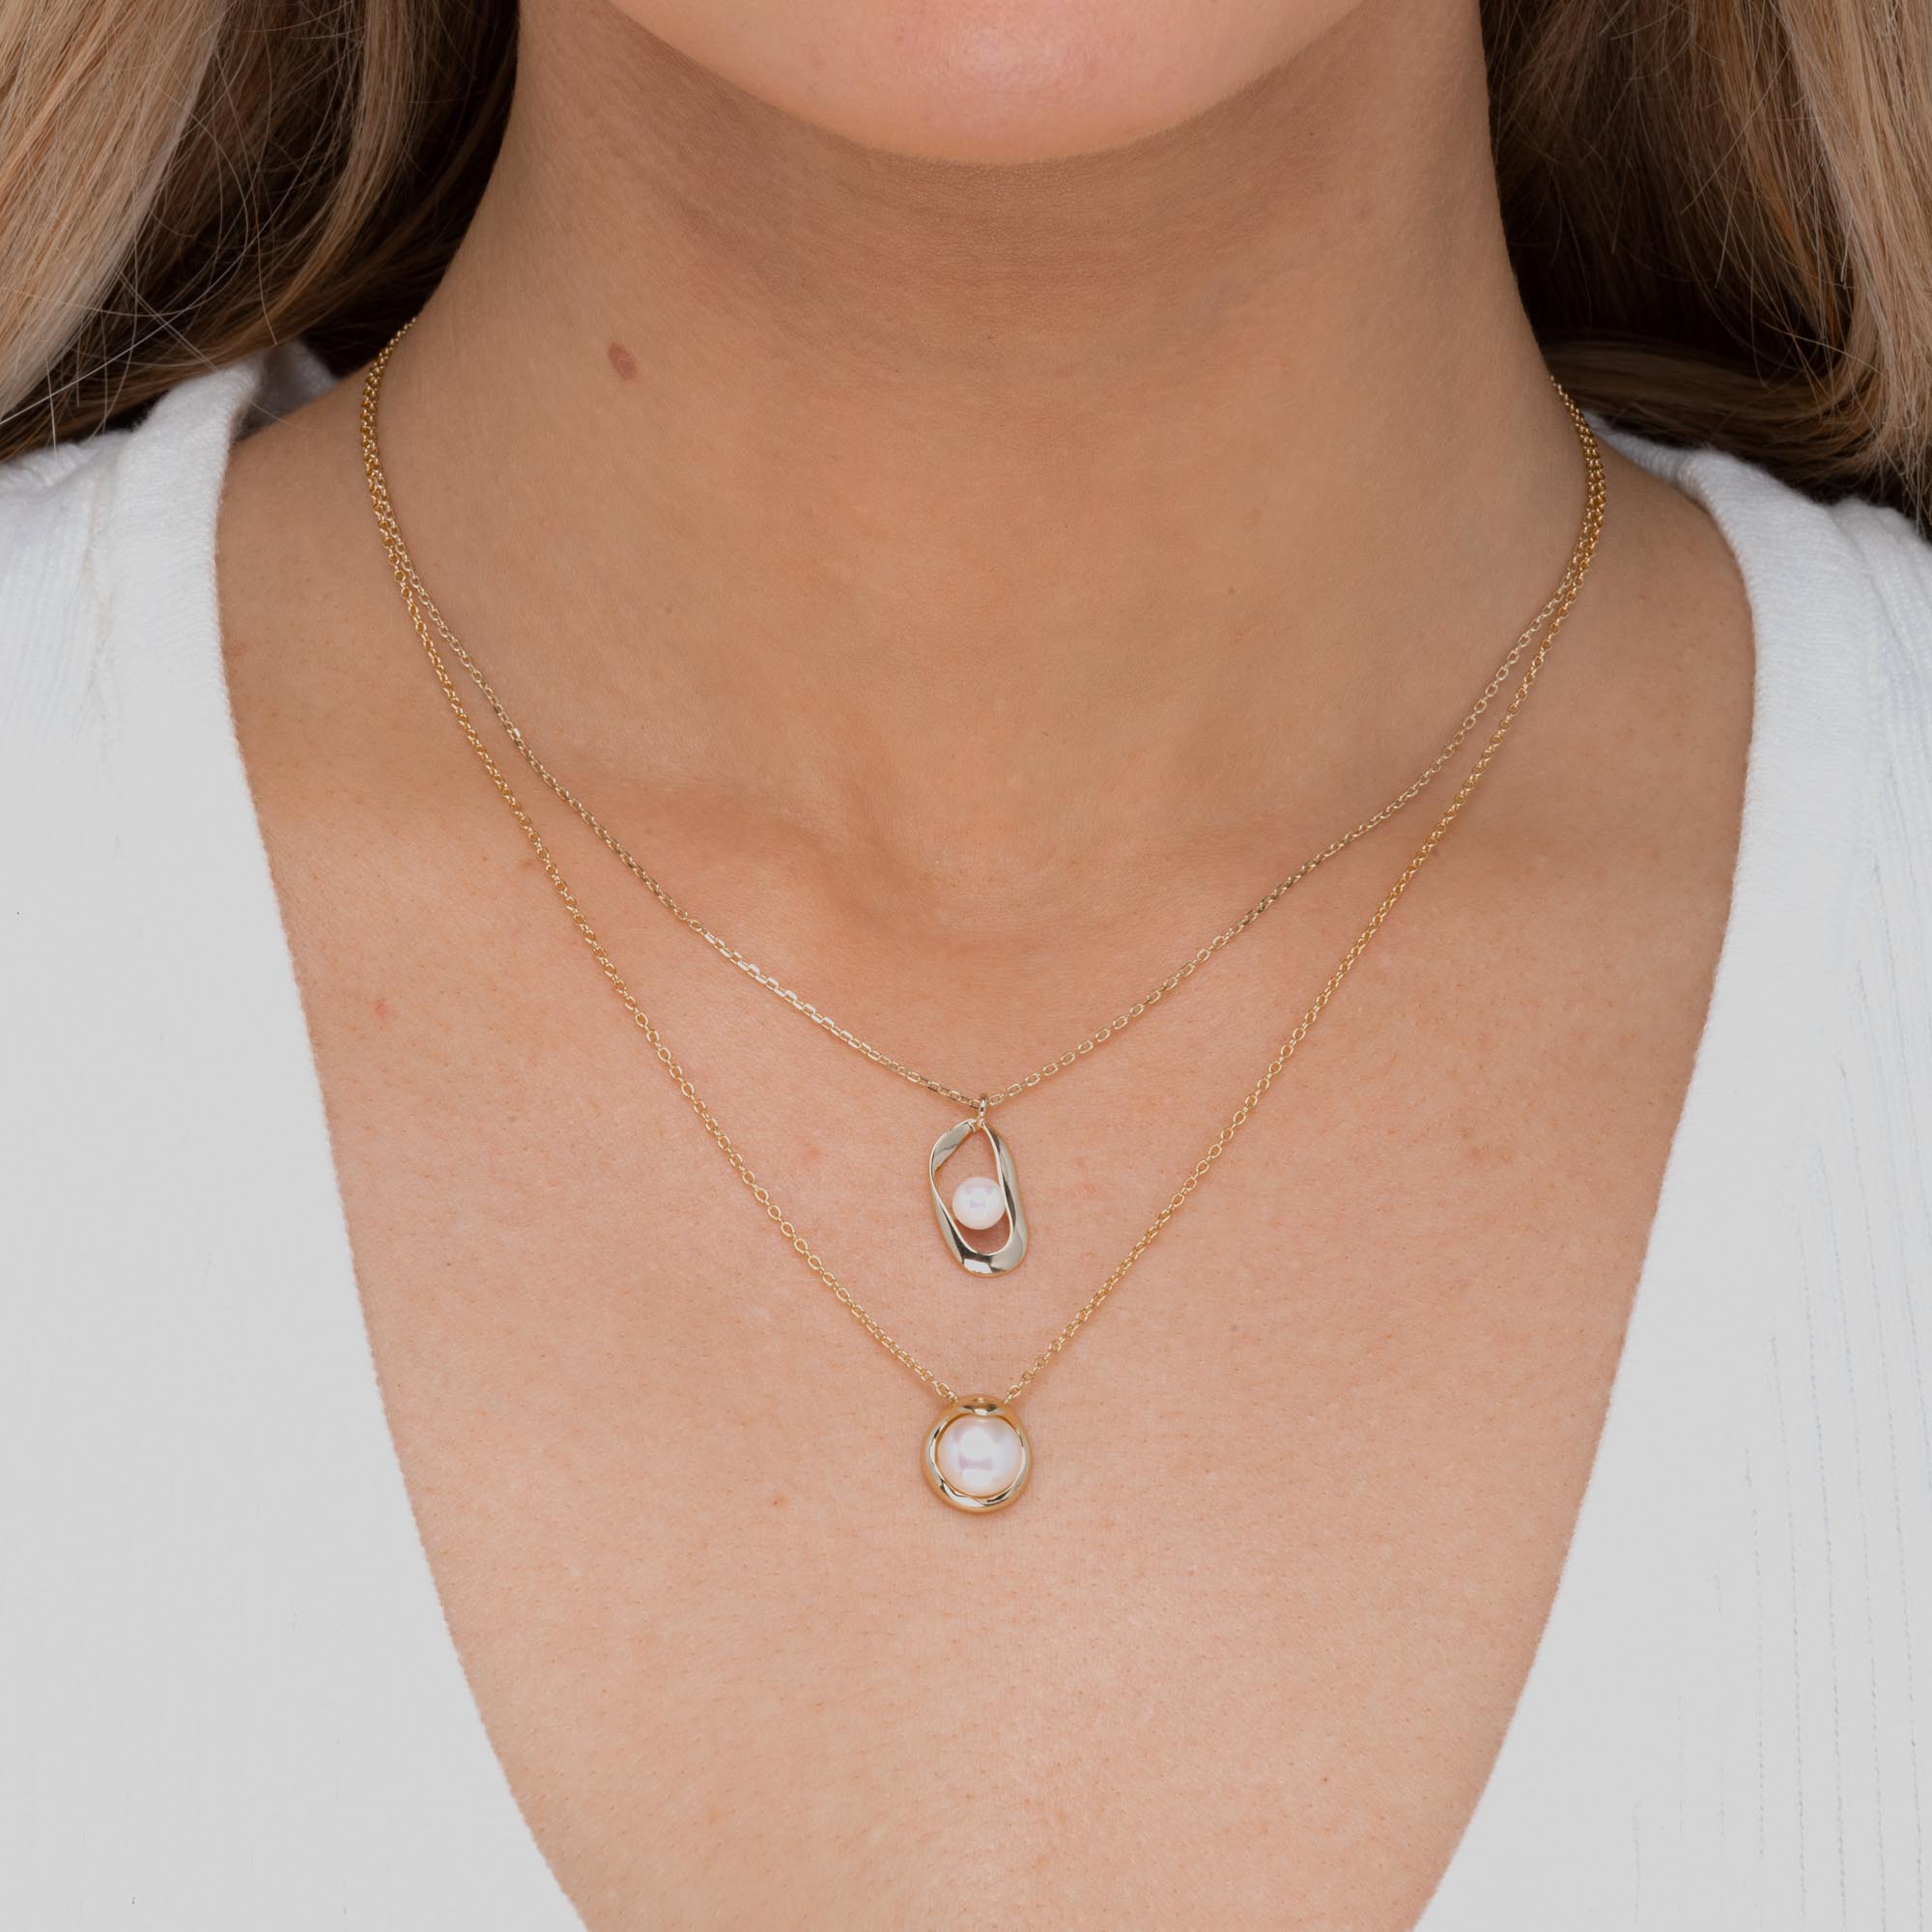 Floating Circular Pearl Necklace